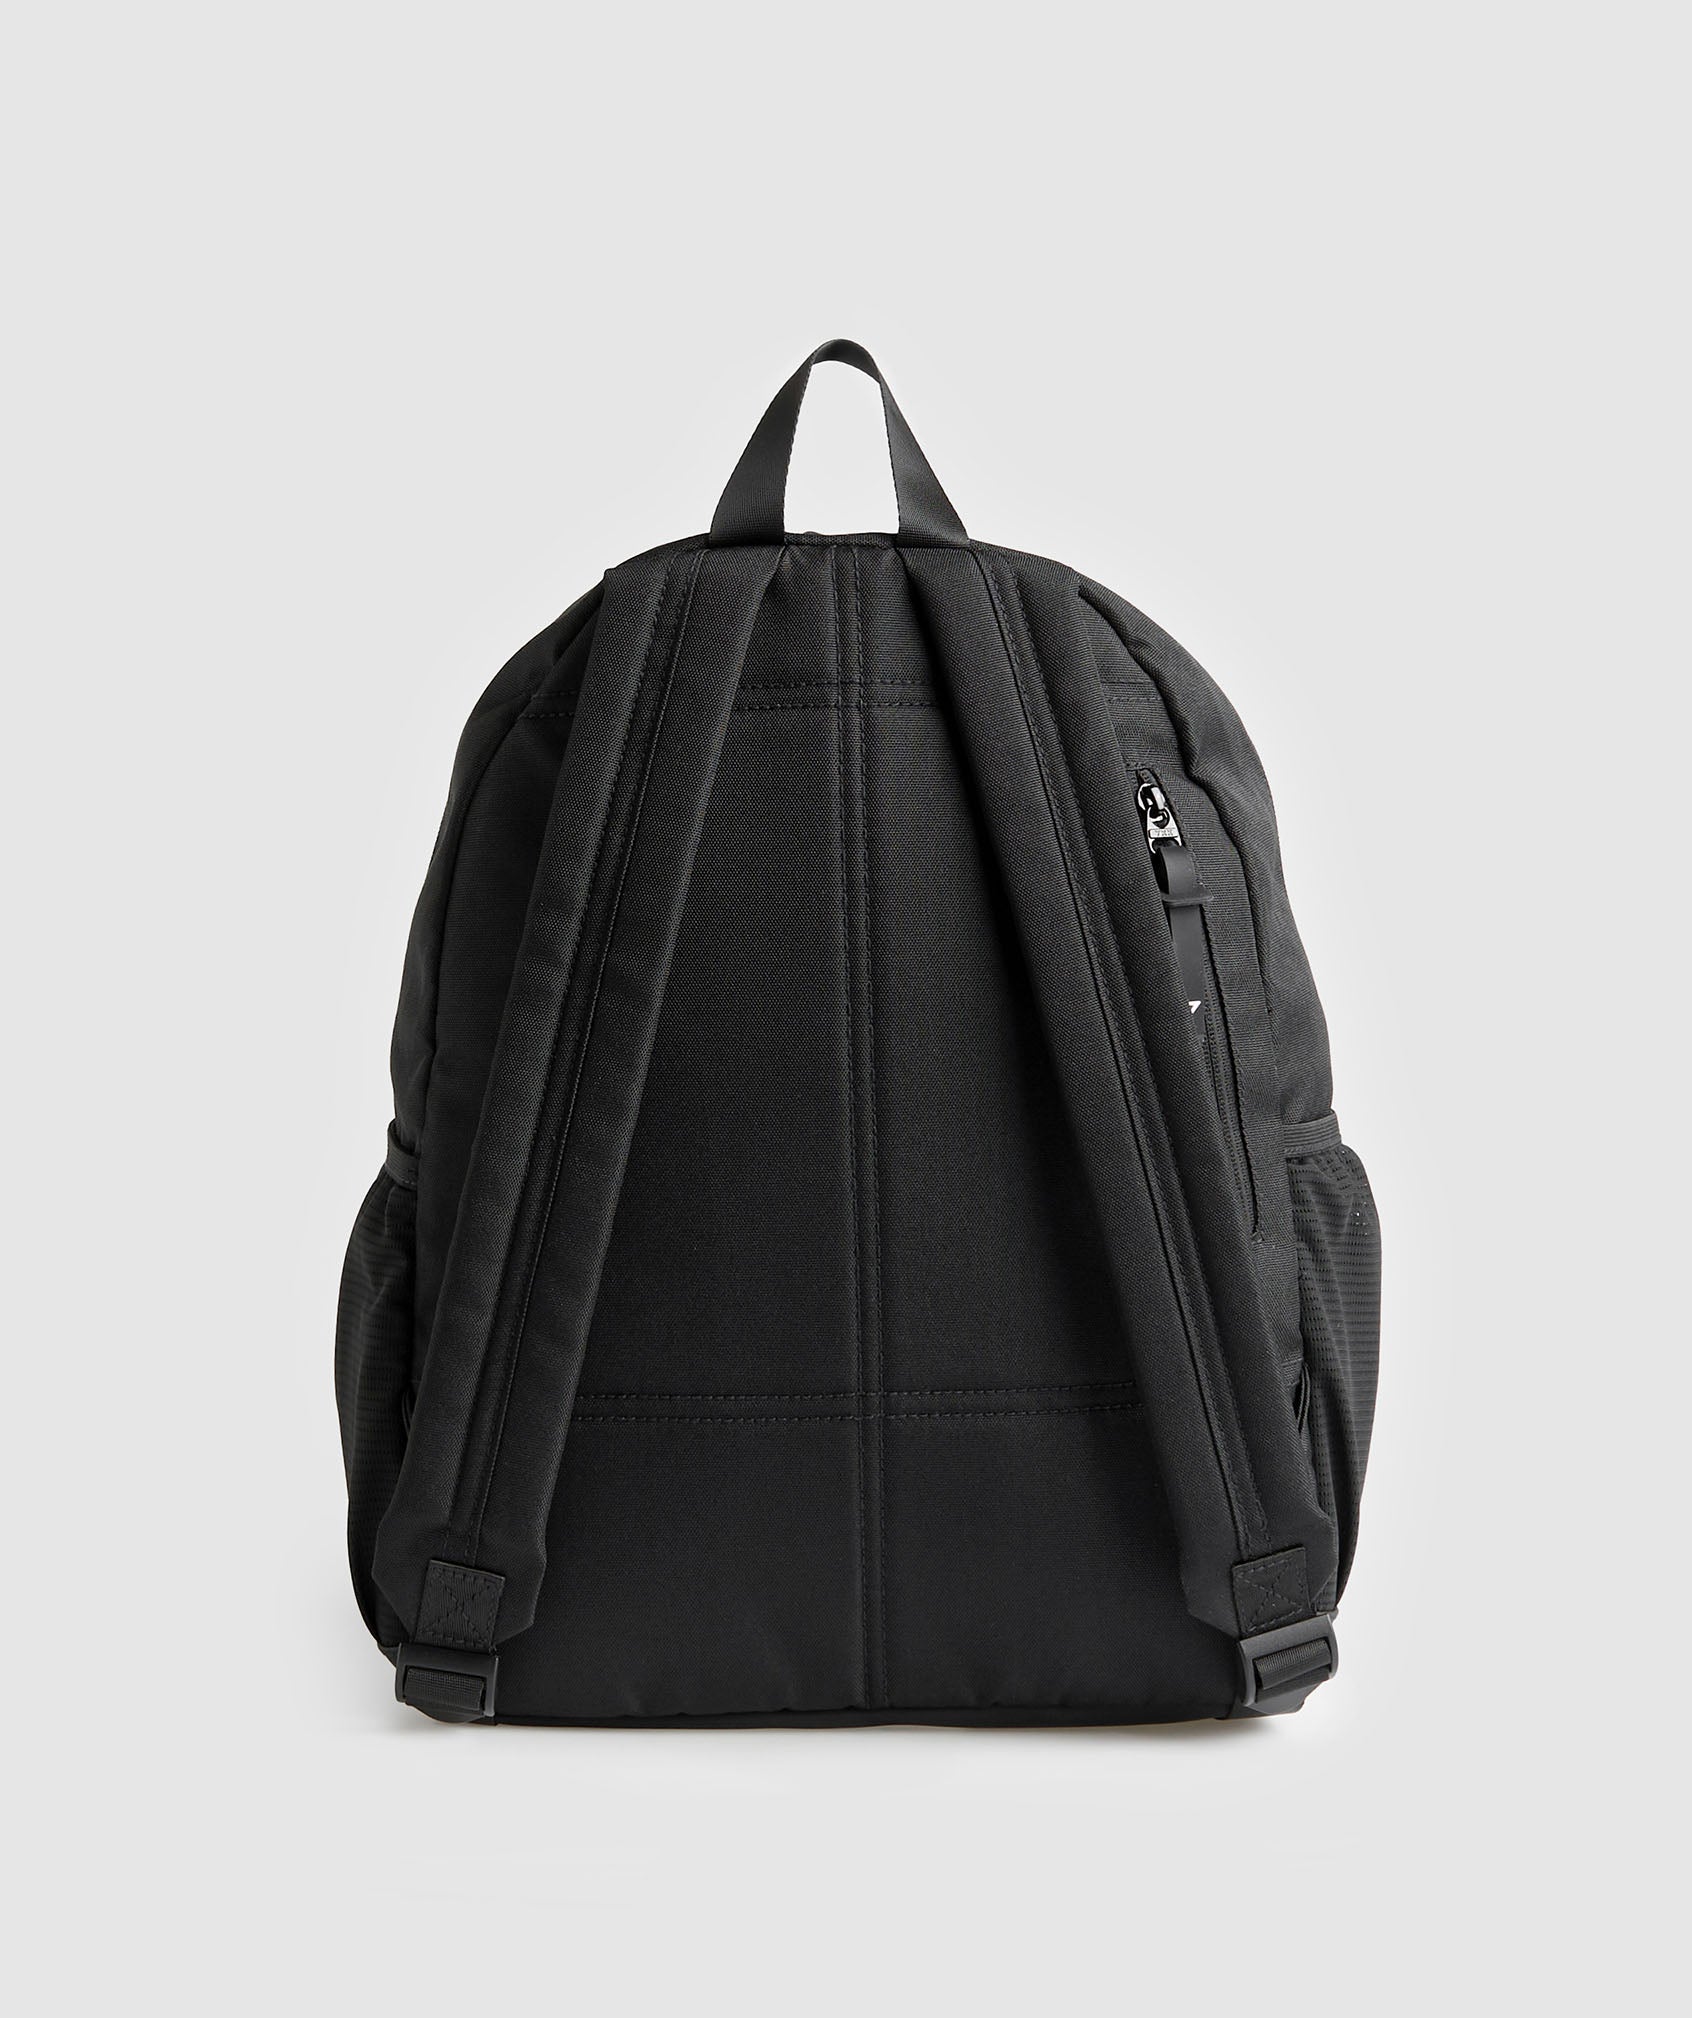 Everyday Backpack in Black - view 2